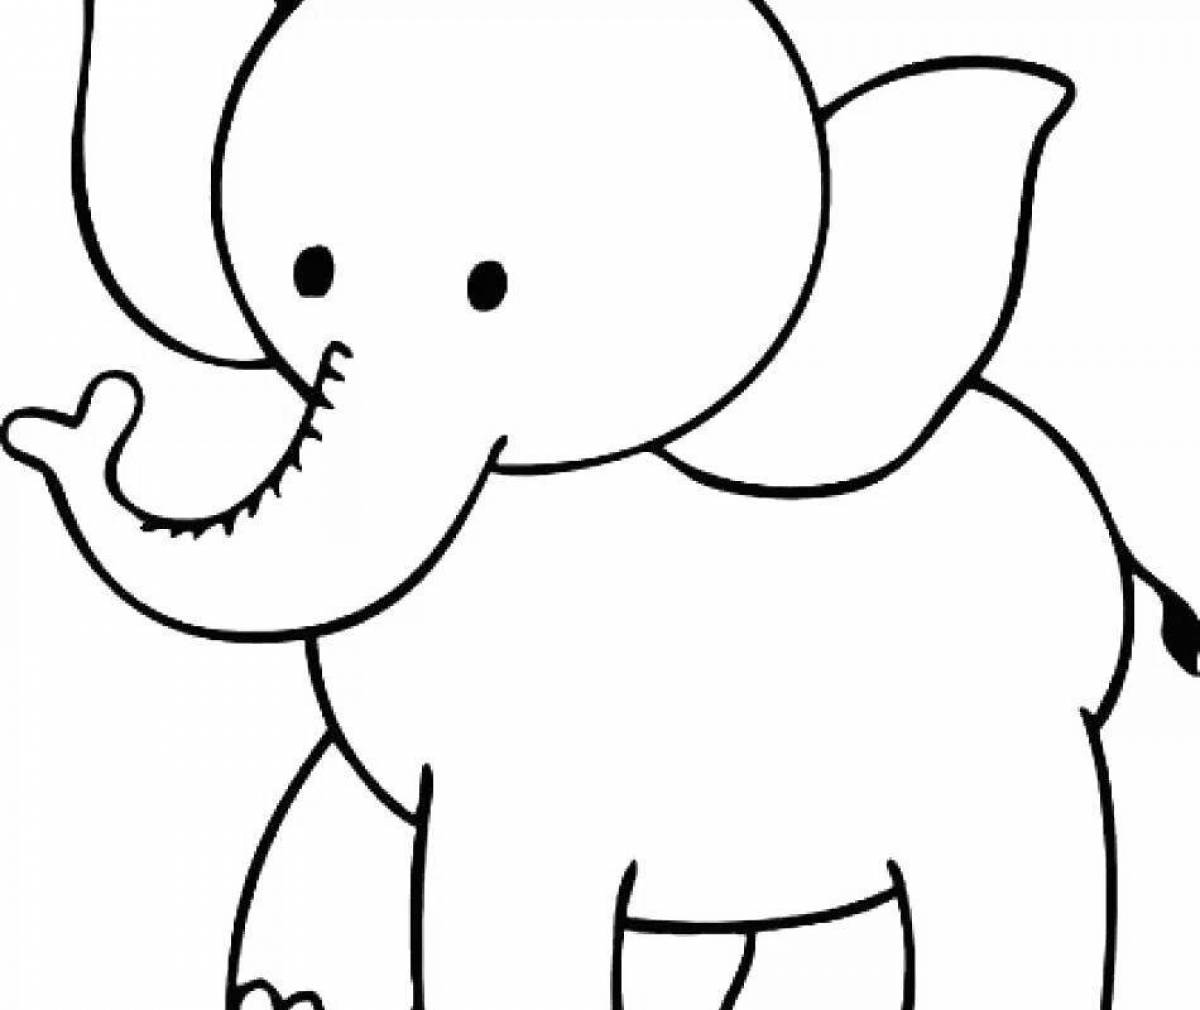 Great elephant coloring book for kids